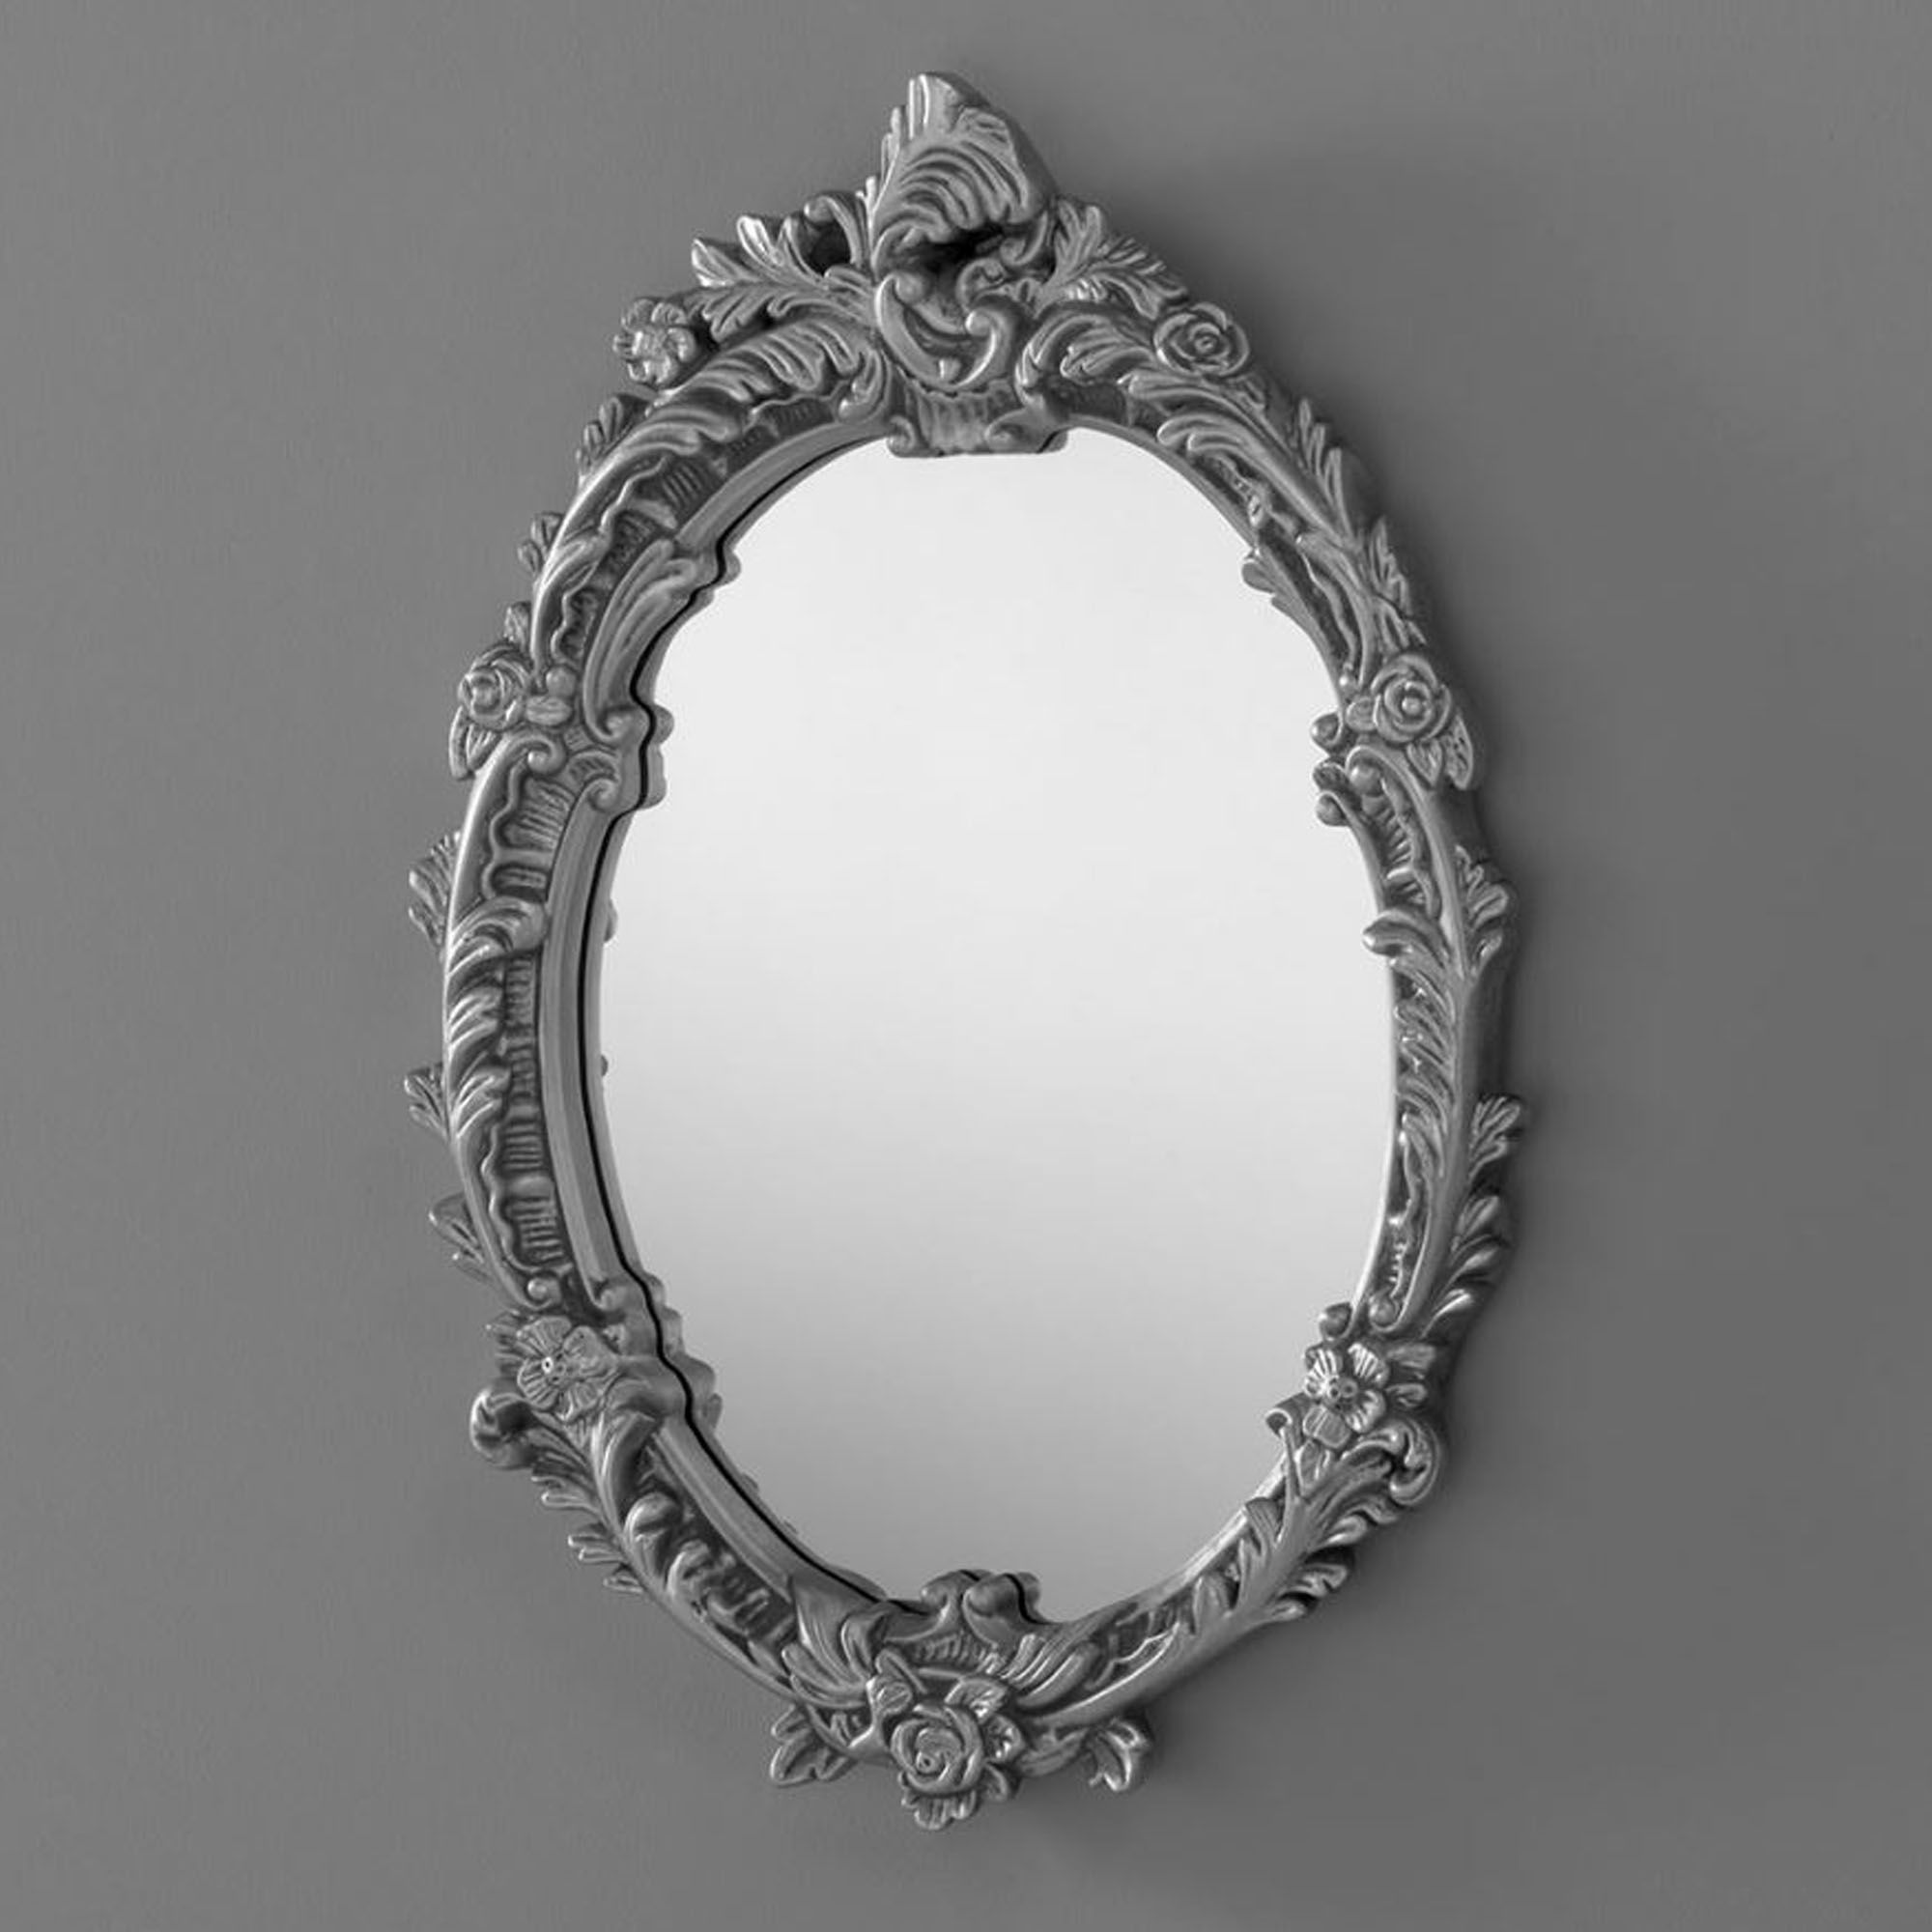 Antique French Style Oval Ornate Wall Mirror | Homesdirect365 Inside Antiqued Glass Wall Mirrors (Photo 6 of 15)